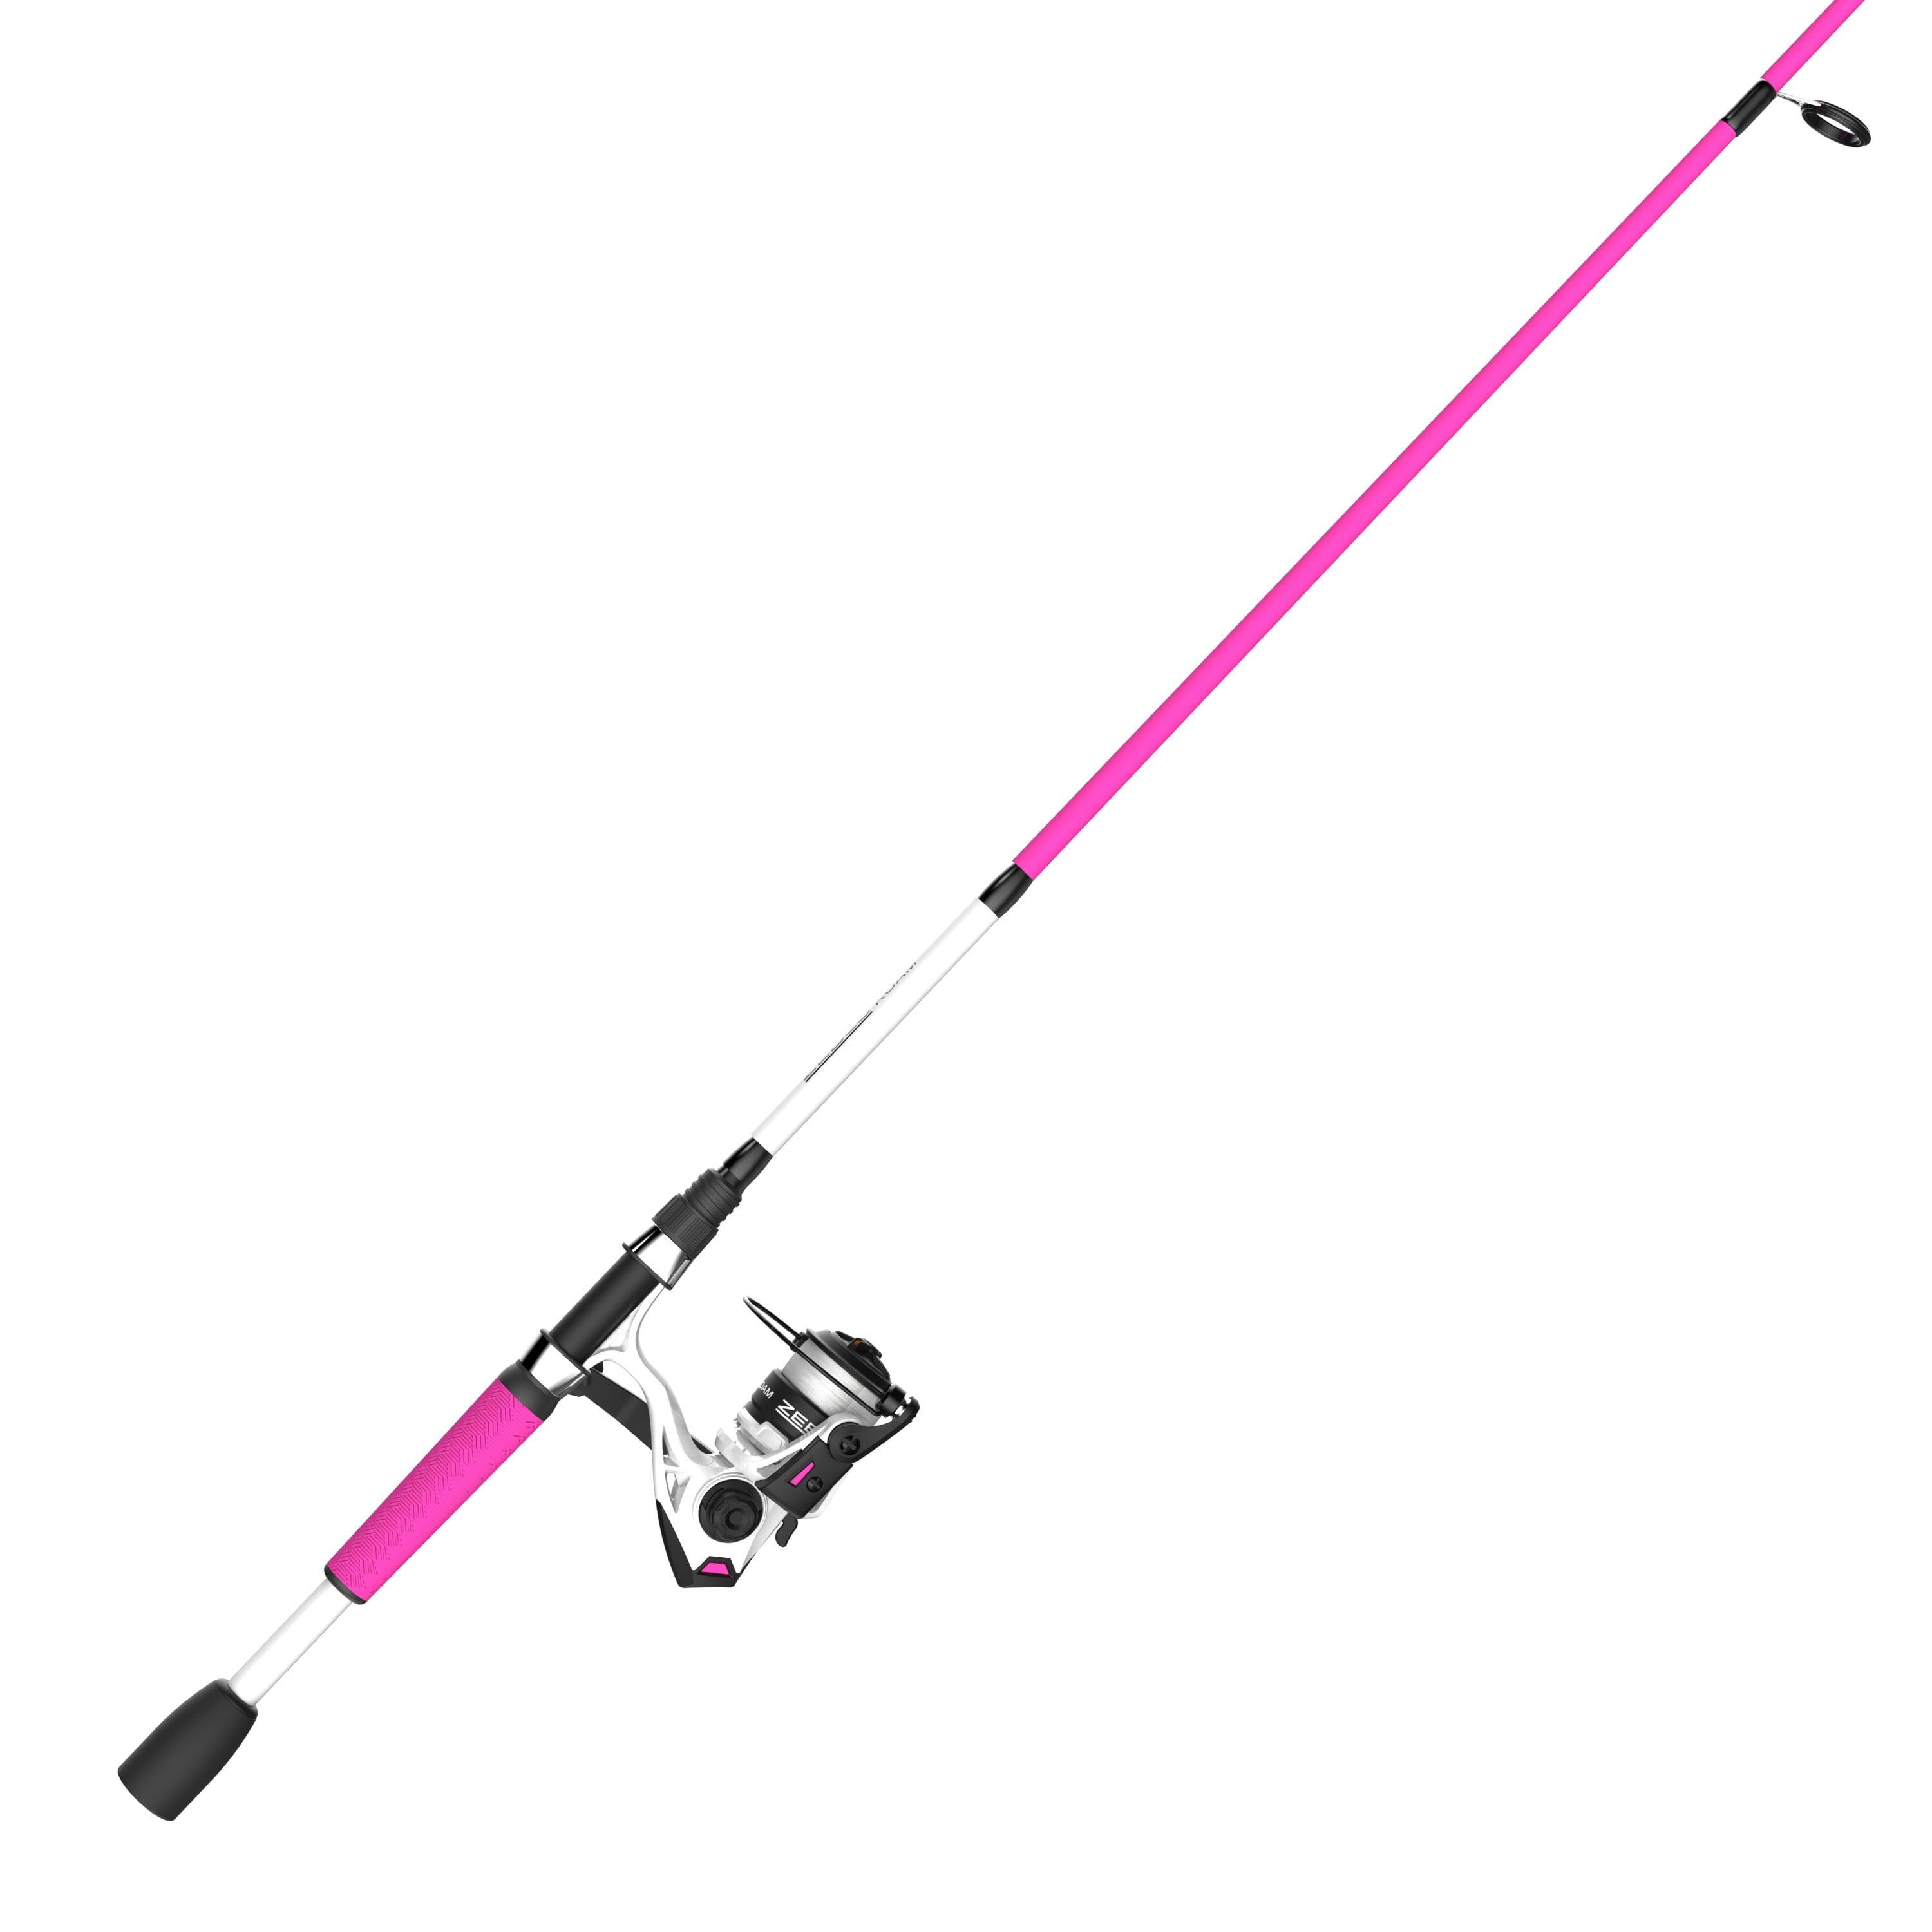 Shimano Sellus Casting Rod 6'8 Length, 1pc, 20-50 lb Line Rate, 1